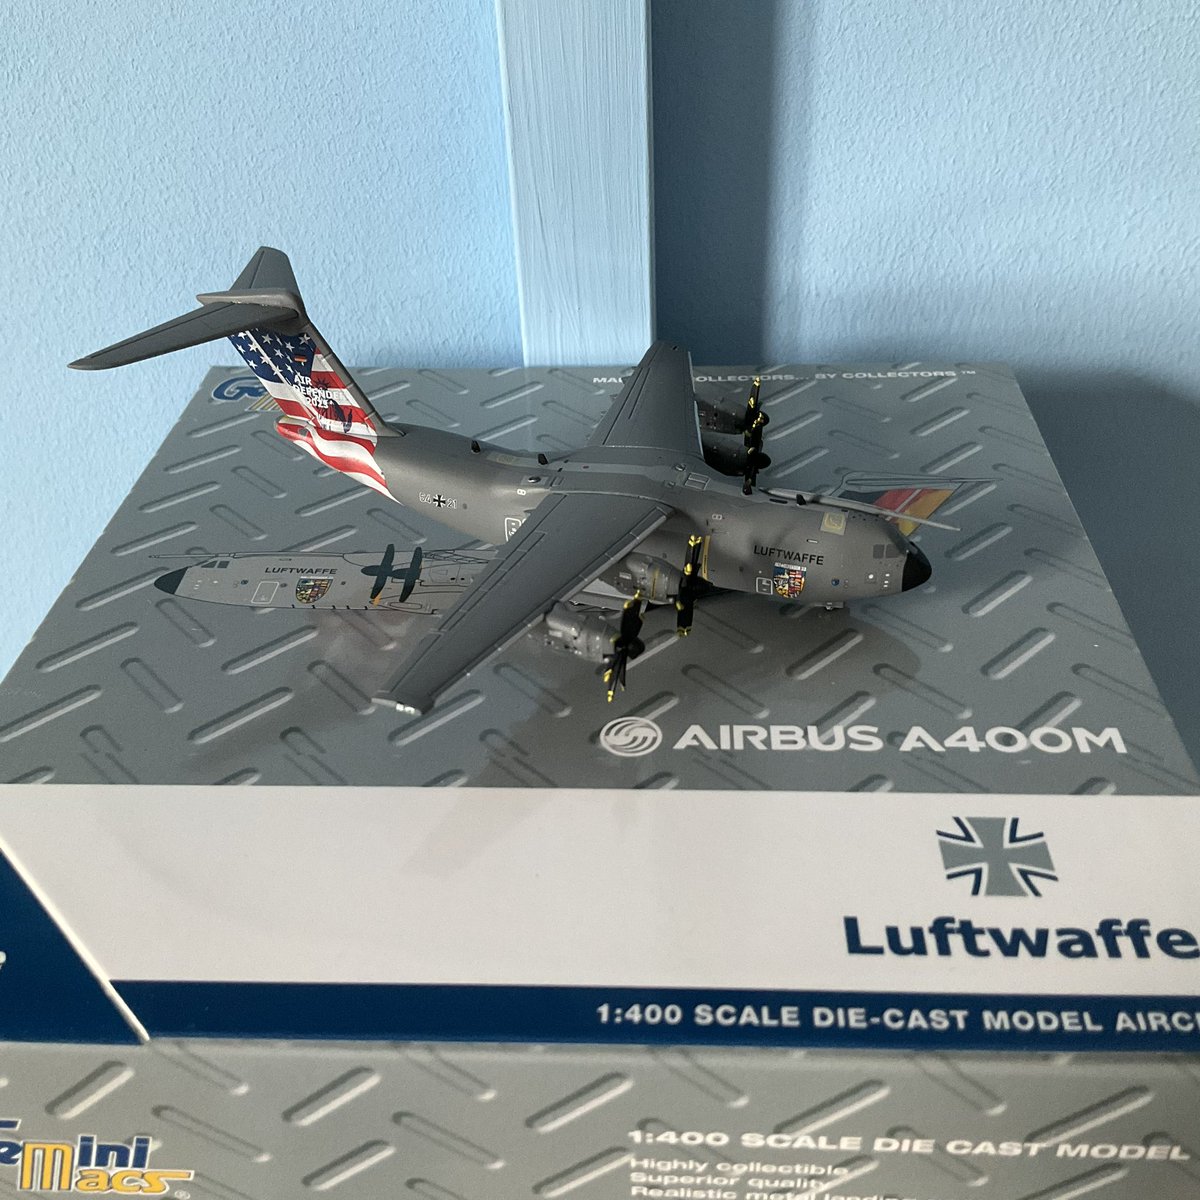 Yay 🥳 Look what’s arrived My 1/400 Scale @GeminiJets @Team_Luftwaffe @AirbusDefence A400M 54+21 Air Defender Livery 🇩🇪🇺🇸 Diecast Model whoop 🙌🏼 Love it 😍😃👌🏼✈️ #Luftwaffe #GermanAirForce #AirbusA400MAtlas #AirbusDefence #Military #AirDefenderLivery #DiecastModel #GeminiJets